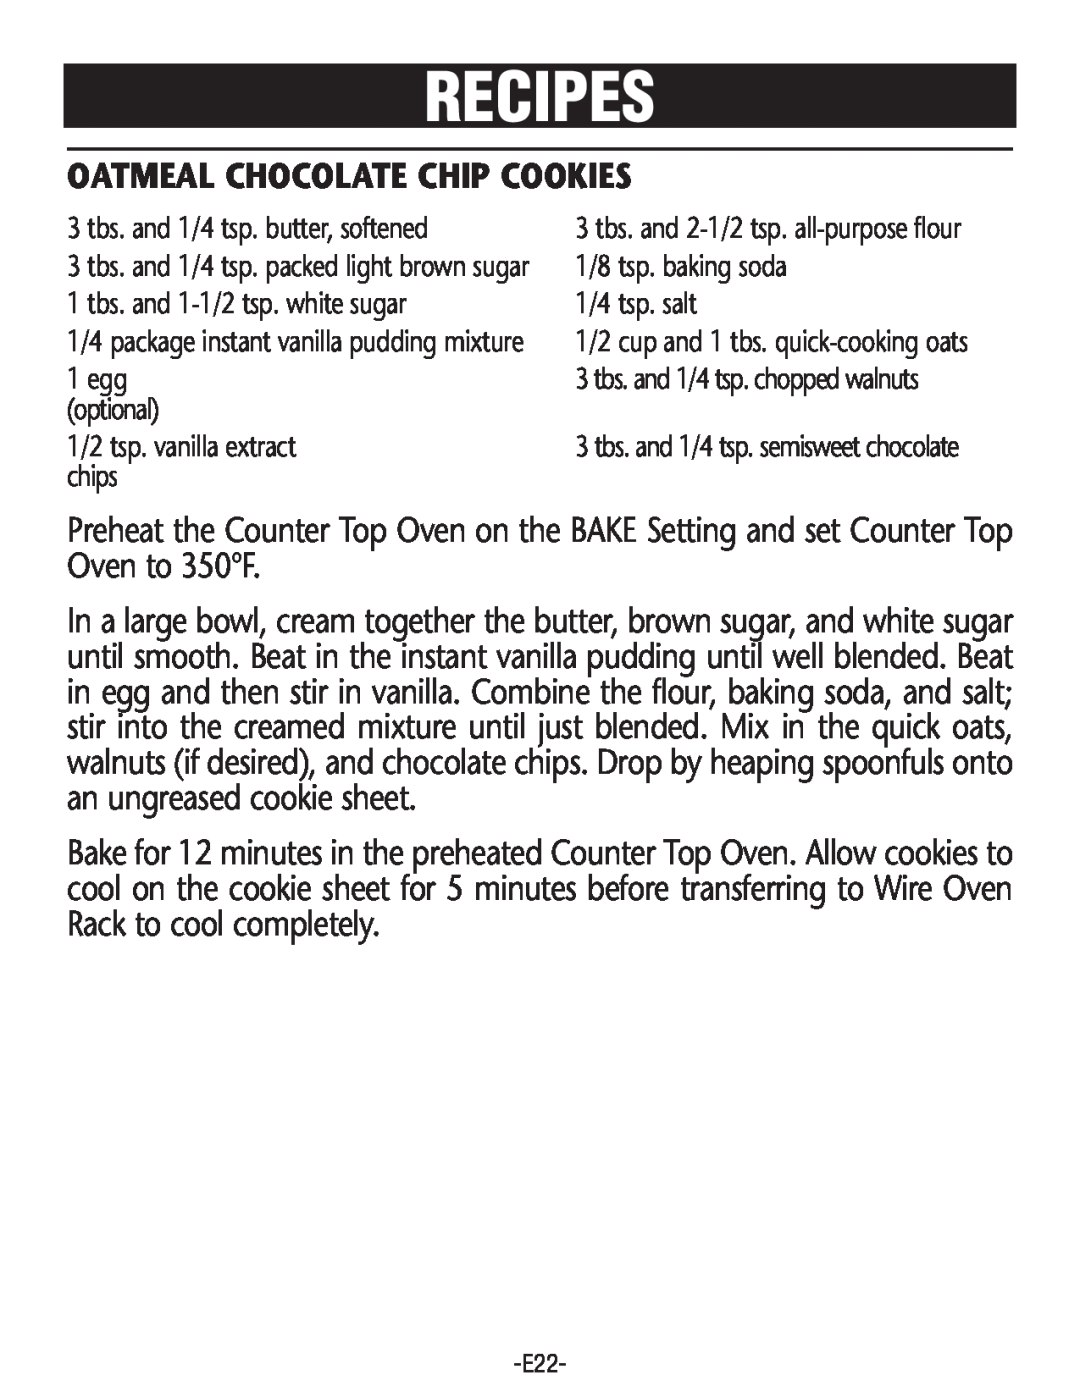 Rival CO602 manual Oatmeal Chocolate Chip Cookies, Recipes 